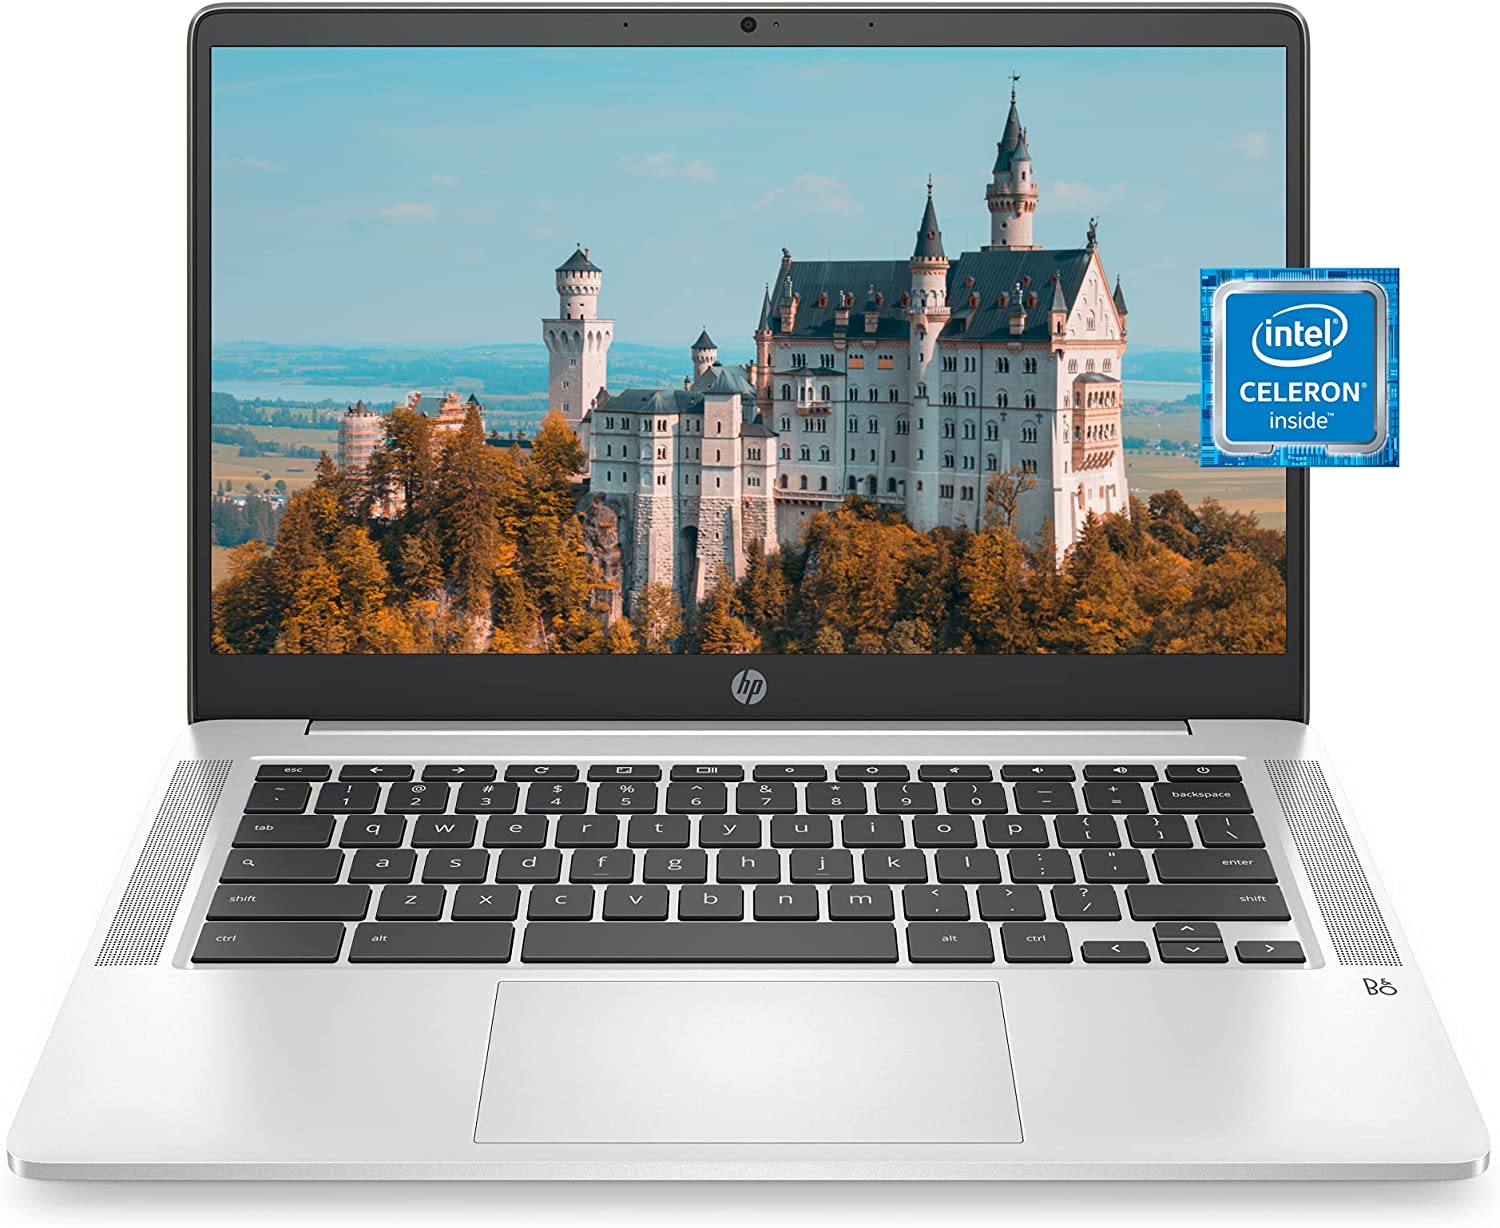 10 Best 14 Inch Laptop Under 500 In 2022 [Buying Guide]